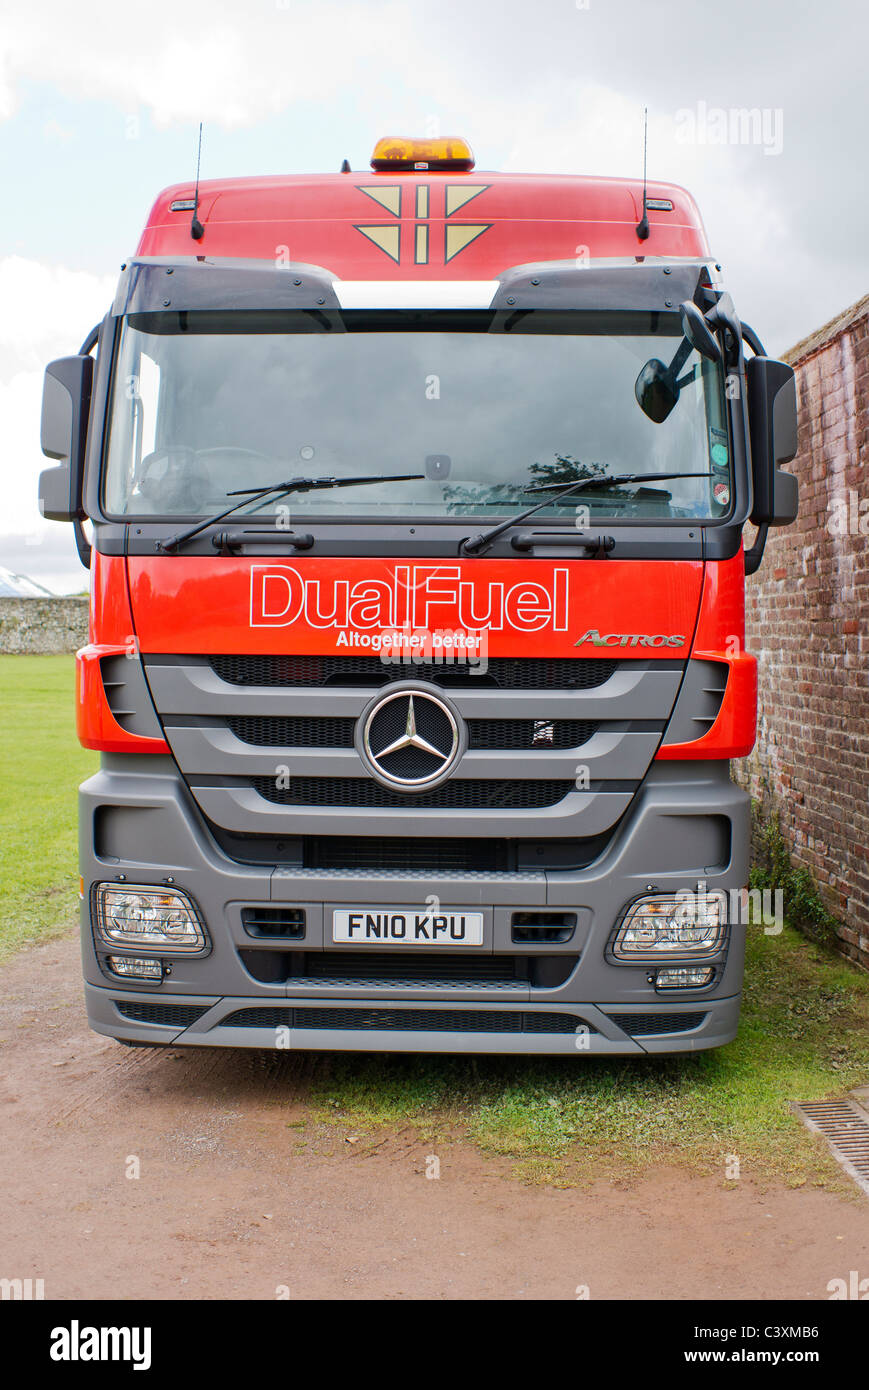 Front view of Mercedes Dual Fuel Acrtos haulage truck prime mover Stock Photo